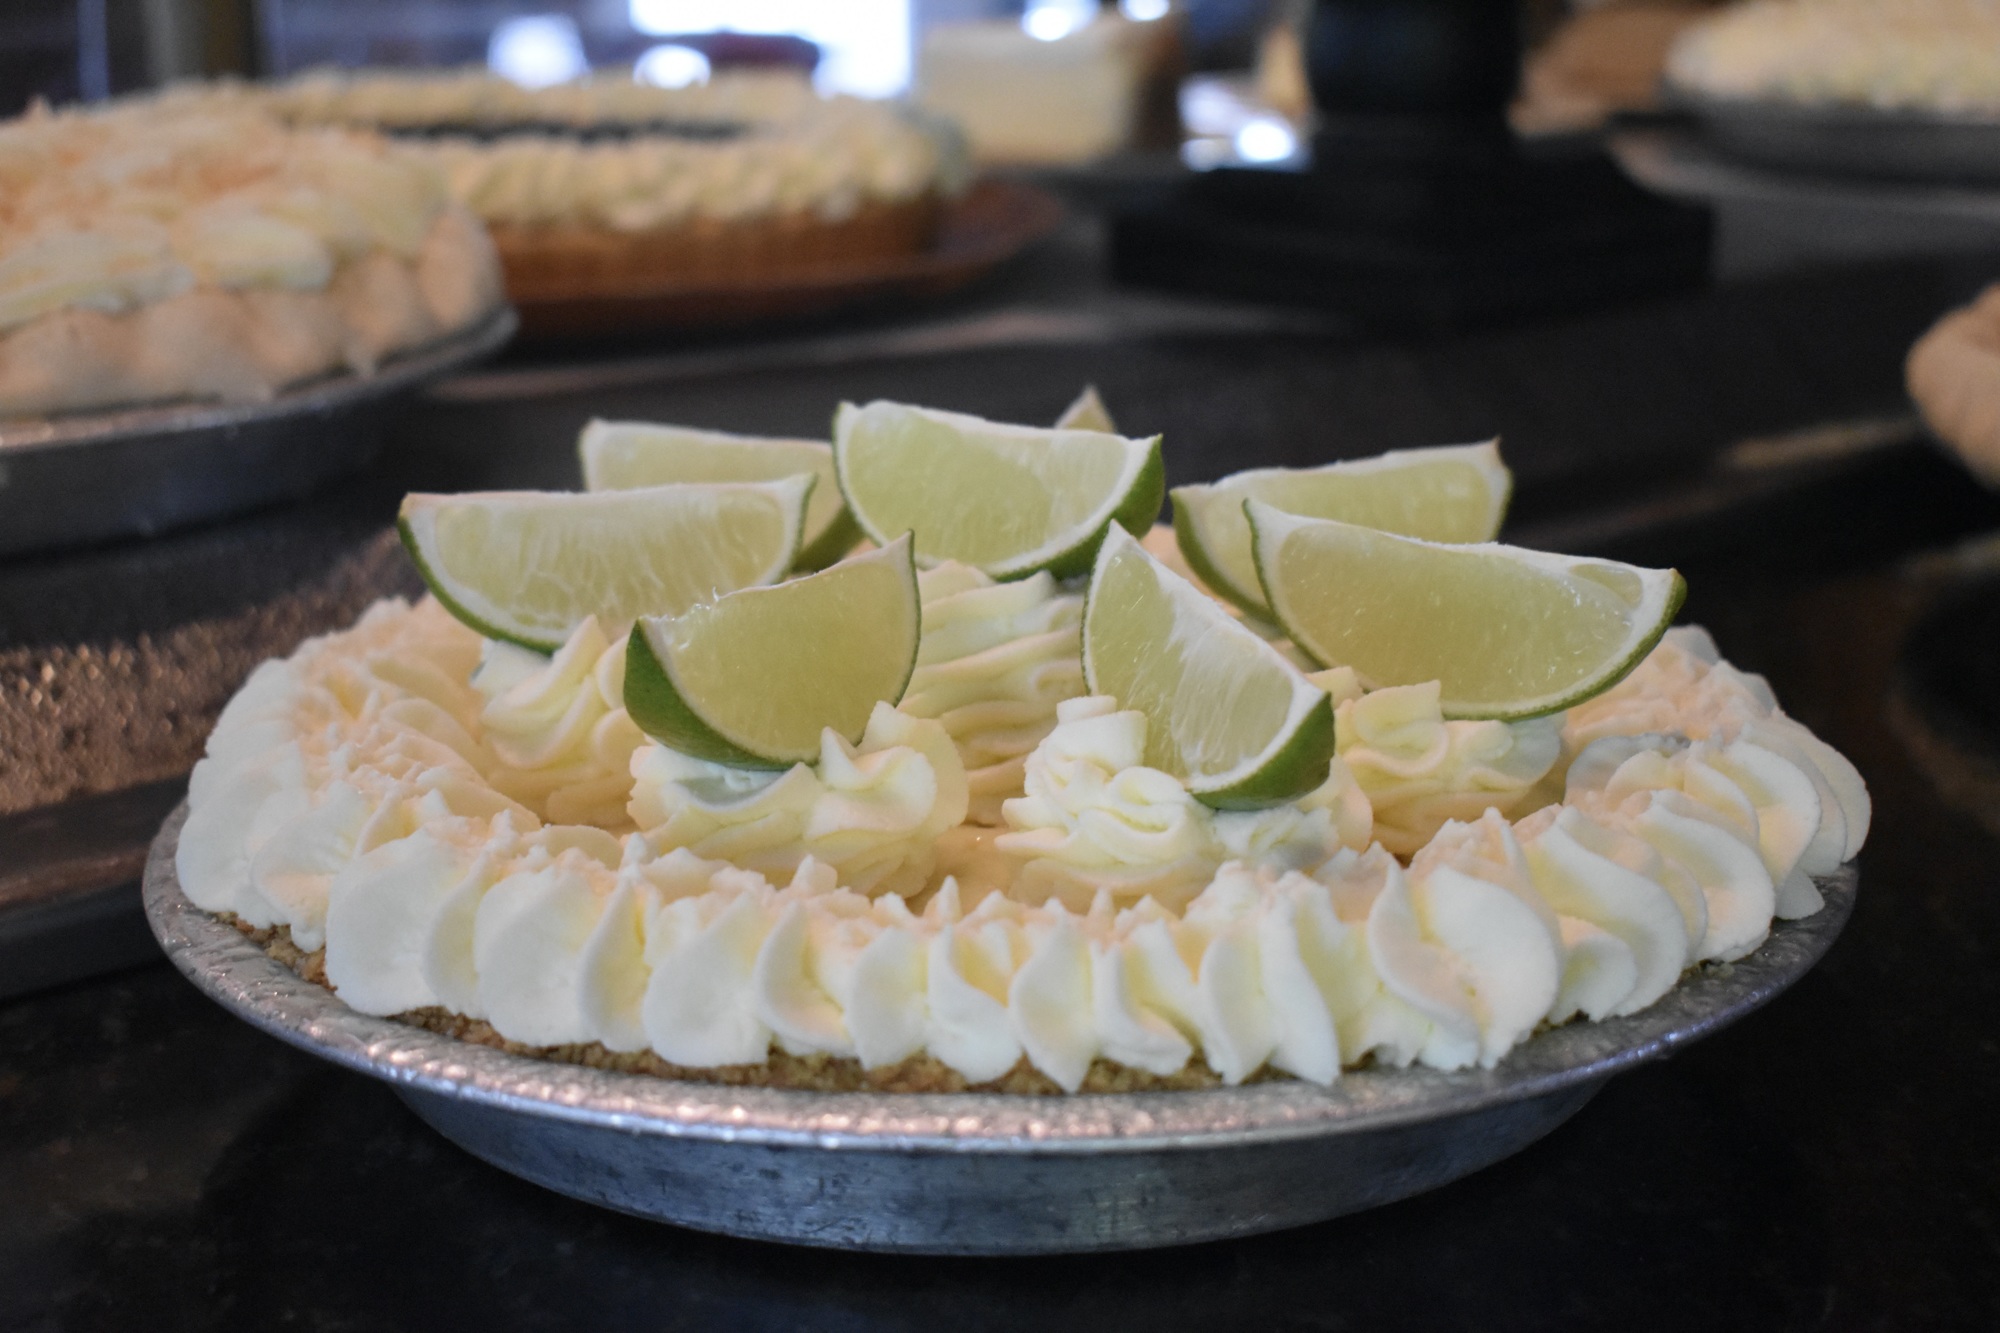 Key lime pie is a Florida classic made from scratch at Euphemia Haye. (Photo by Lesley Dwyer)